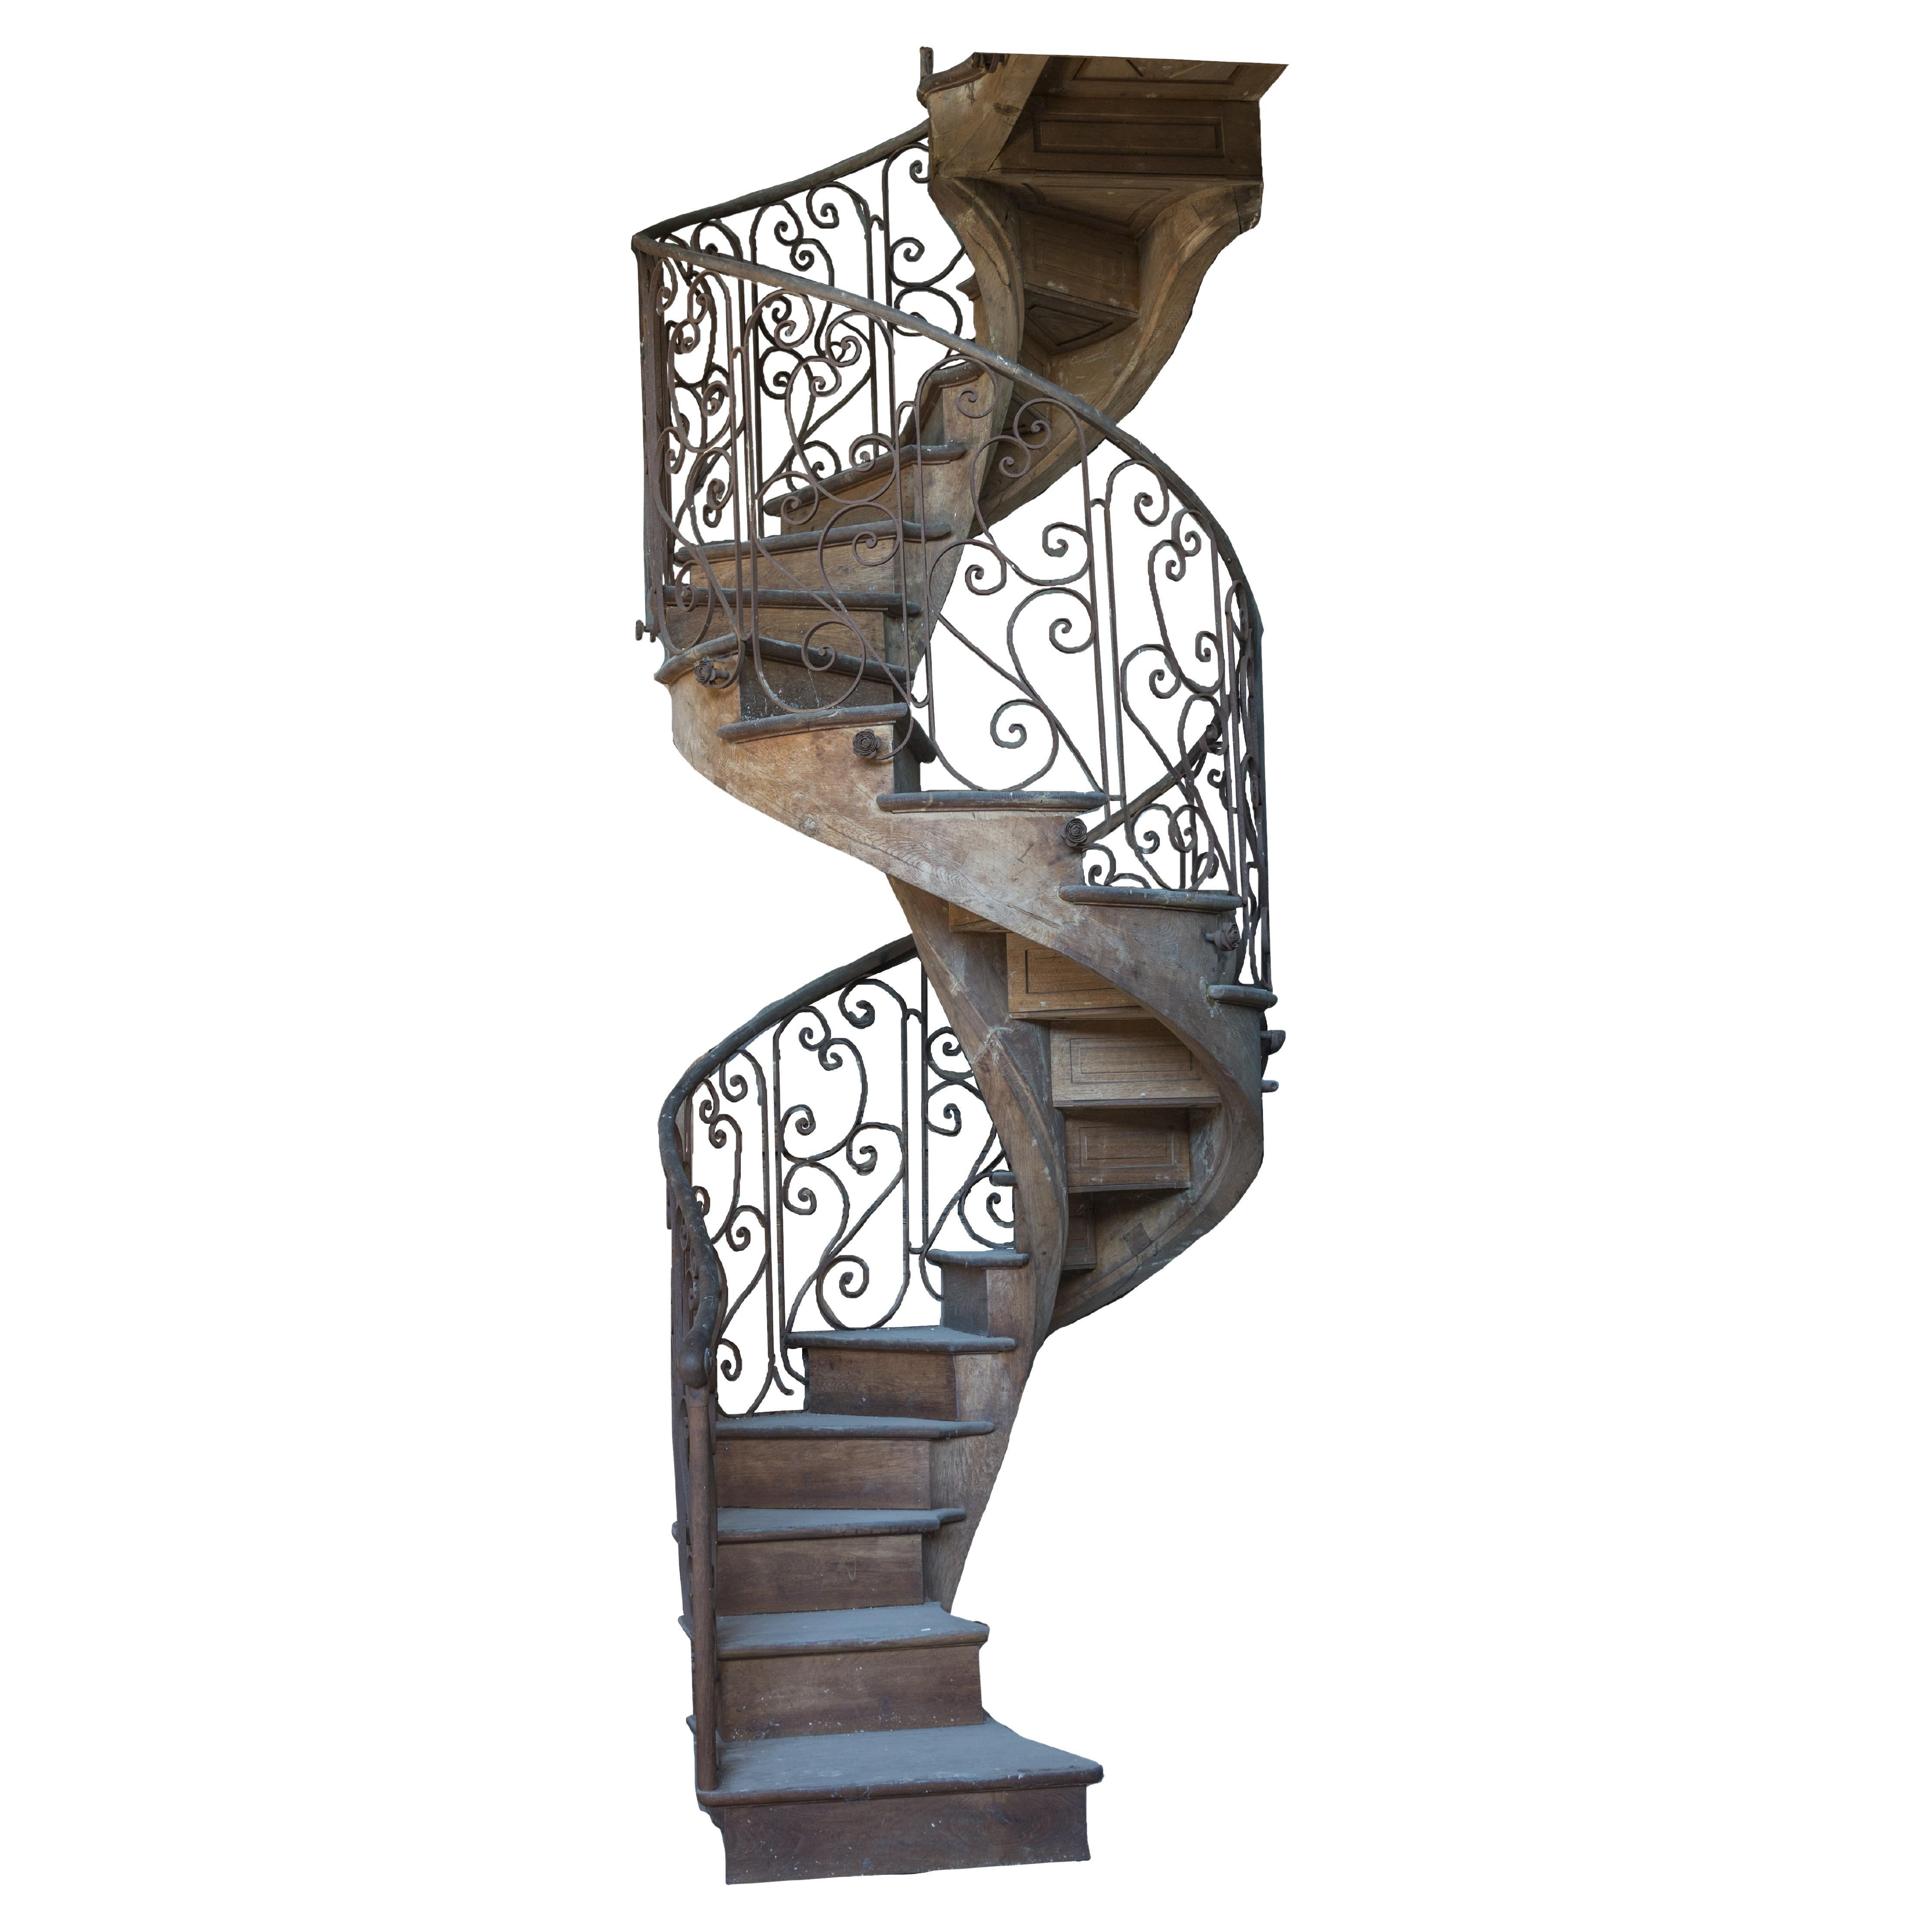 Spiral staircase with a wrought iron railing